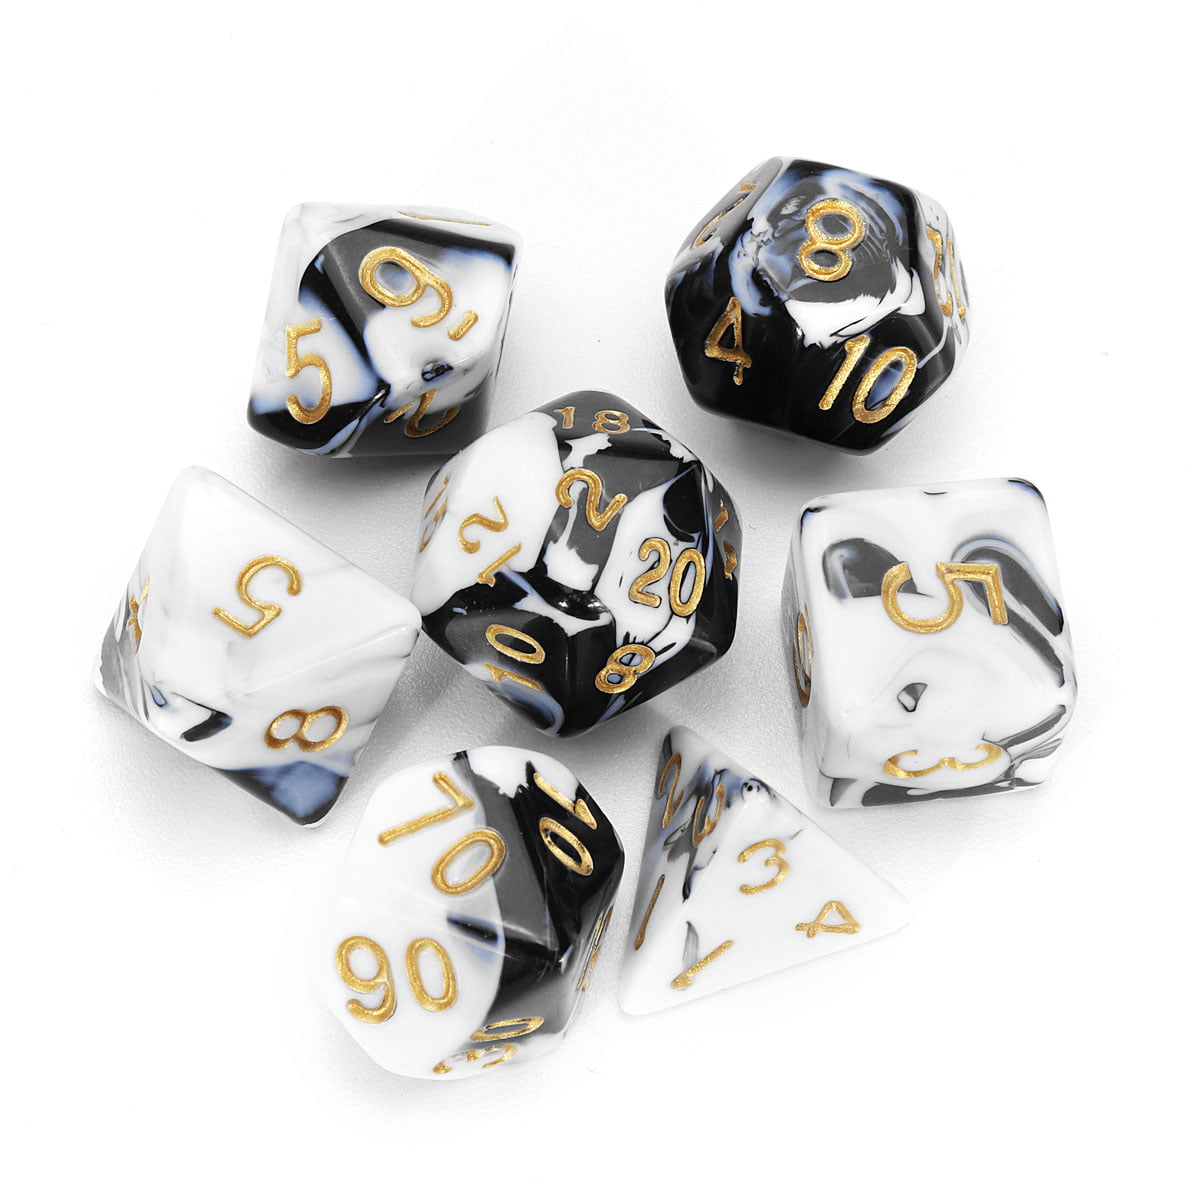 HD DICE DND Dice Set RPG Dice for Dungeons and Dragons D&D Pathfinder Role Playing Games Black & White Marble Polyhedral Dice